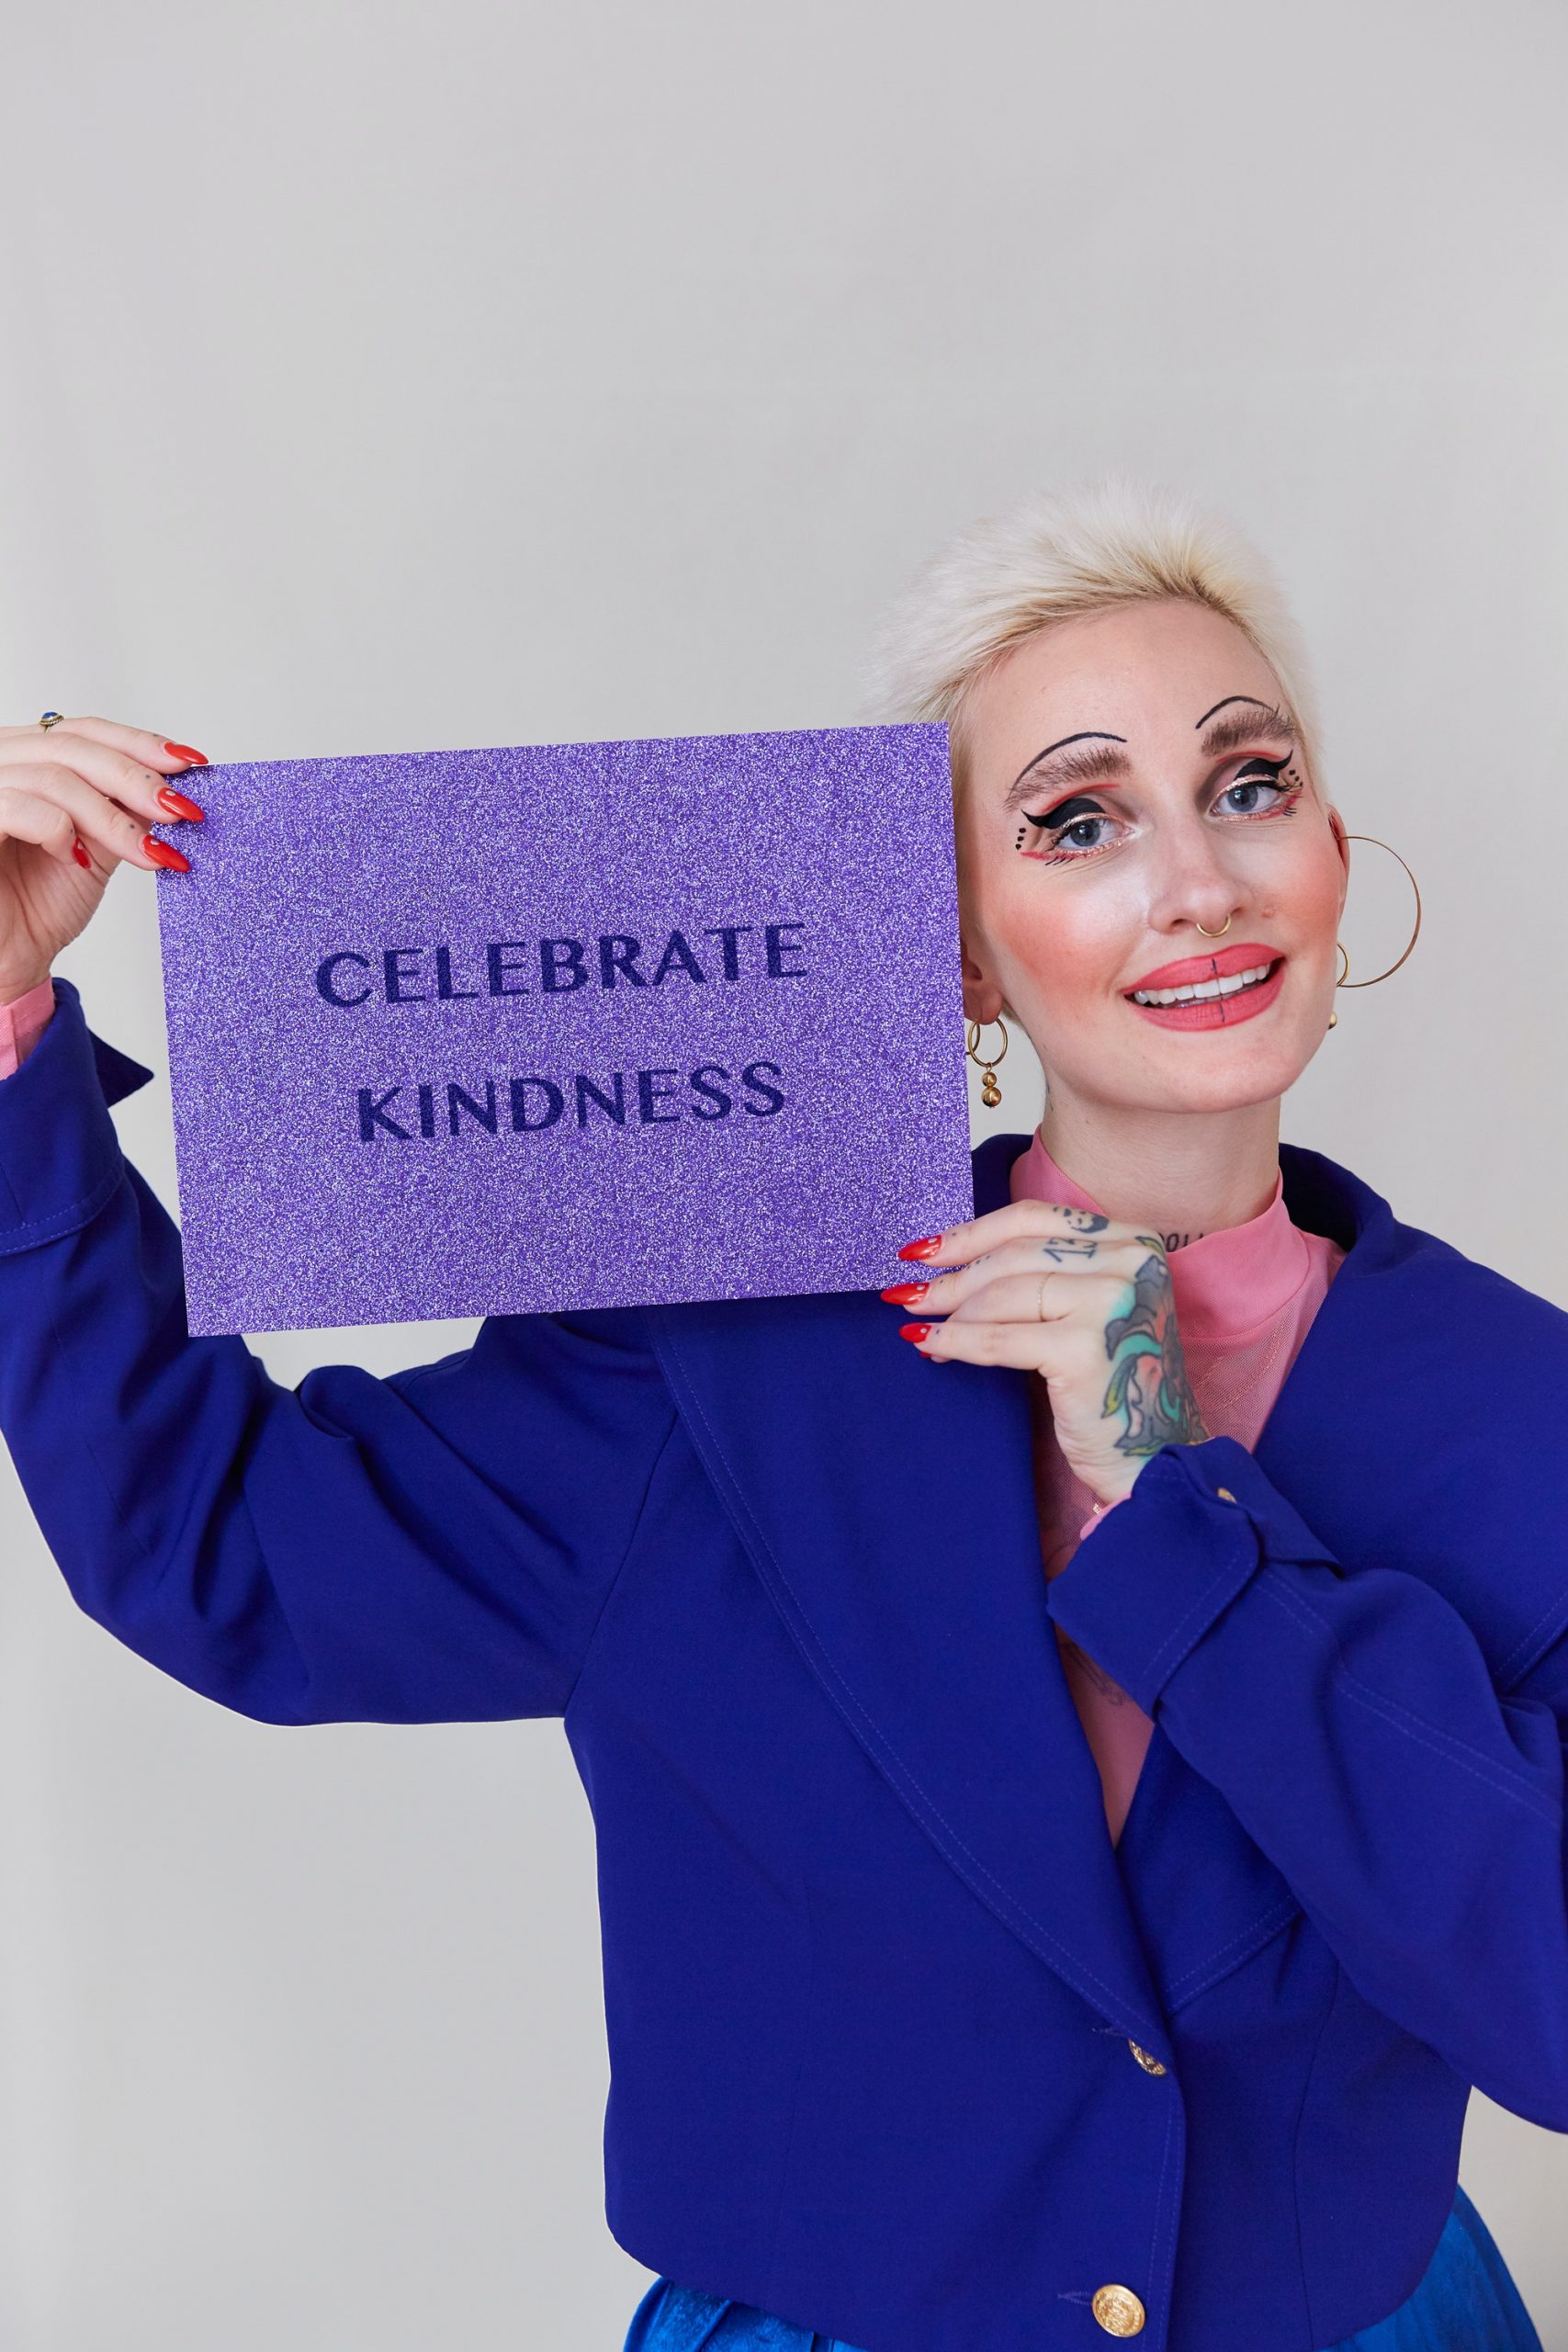 Woman in blue
Blonde woman in blue holding a card
Kindness
Mindful
Mindfulness
Mindful acts